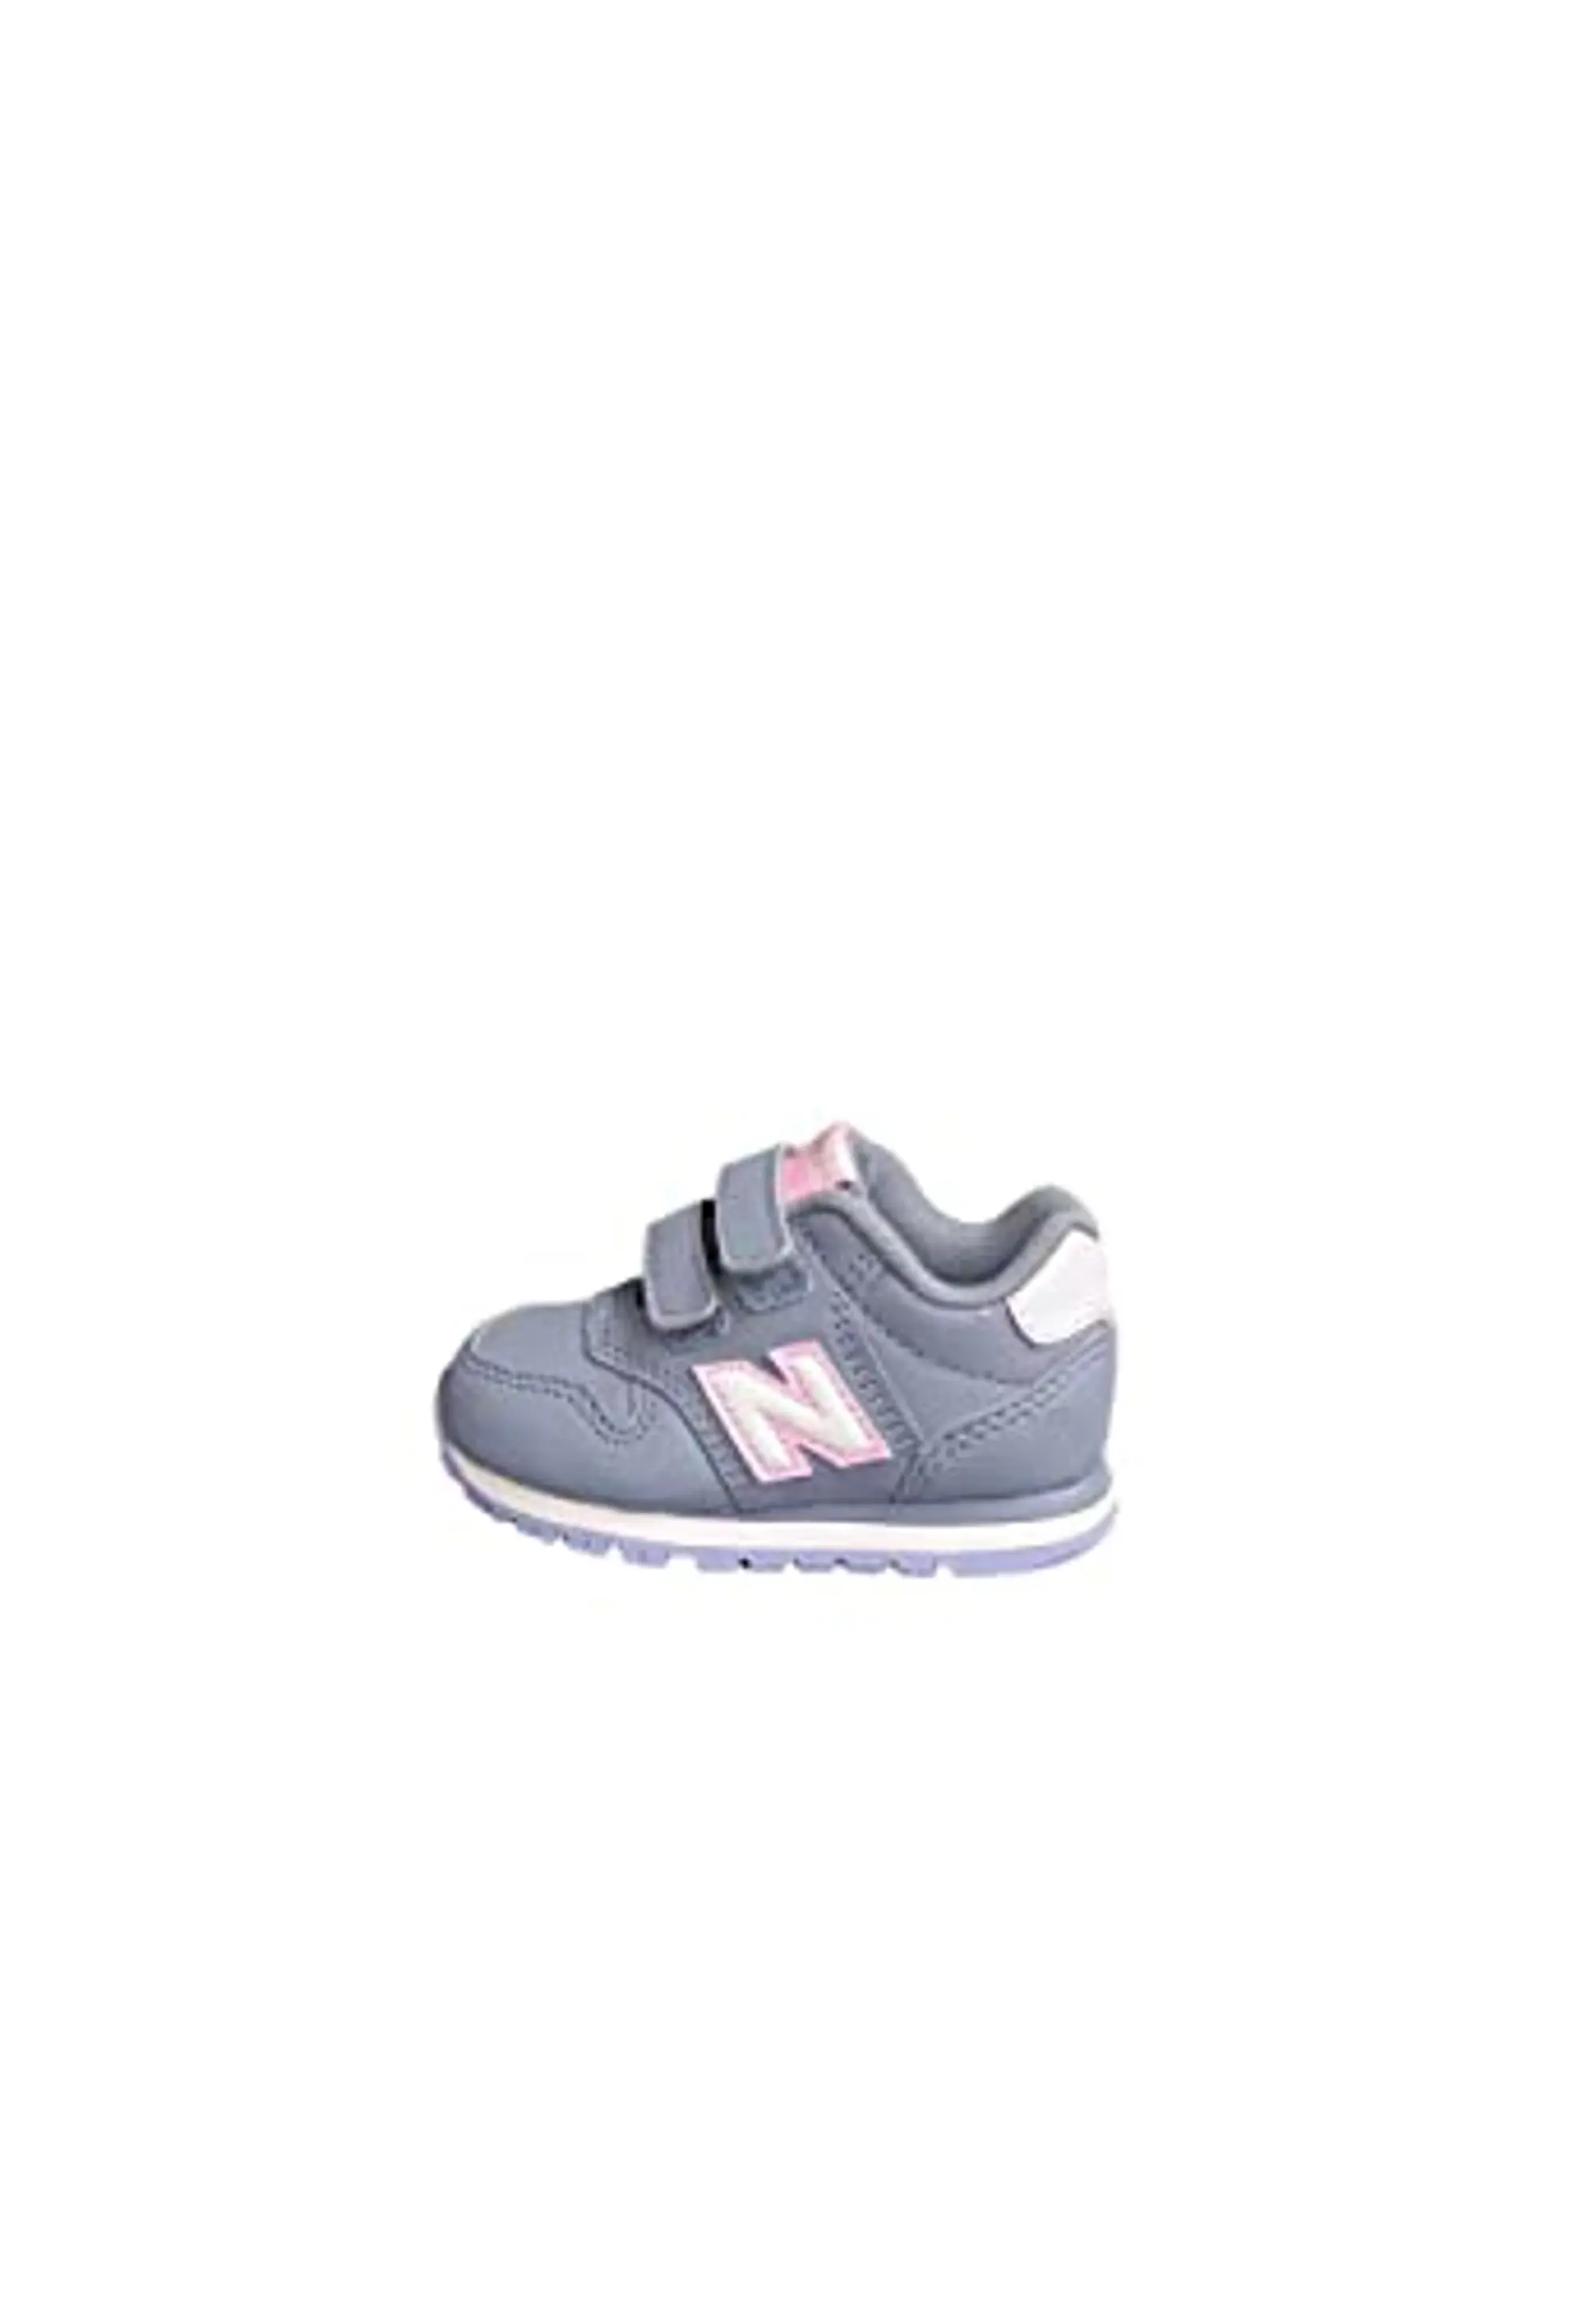 New Balance Girls Wide Fit 373 Trainers Light Olive